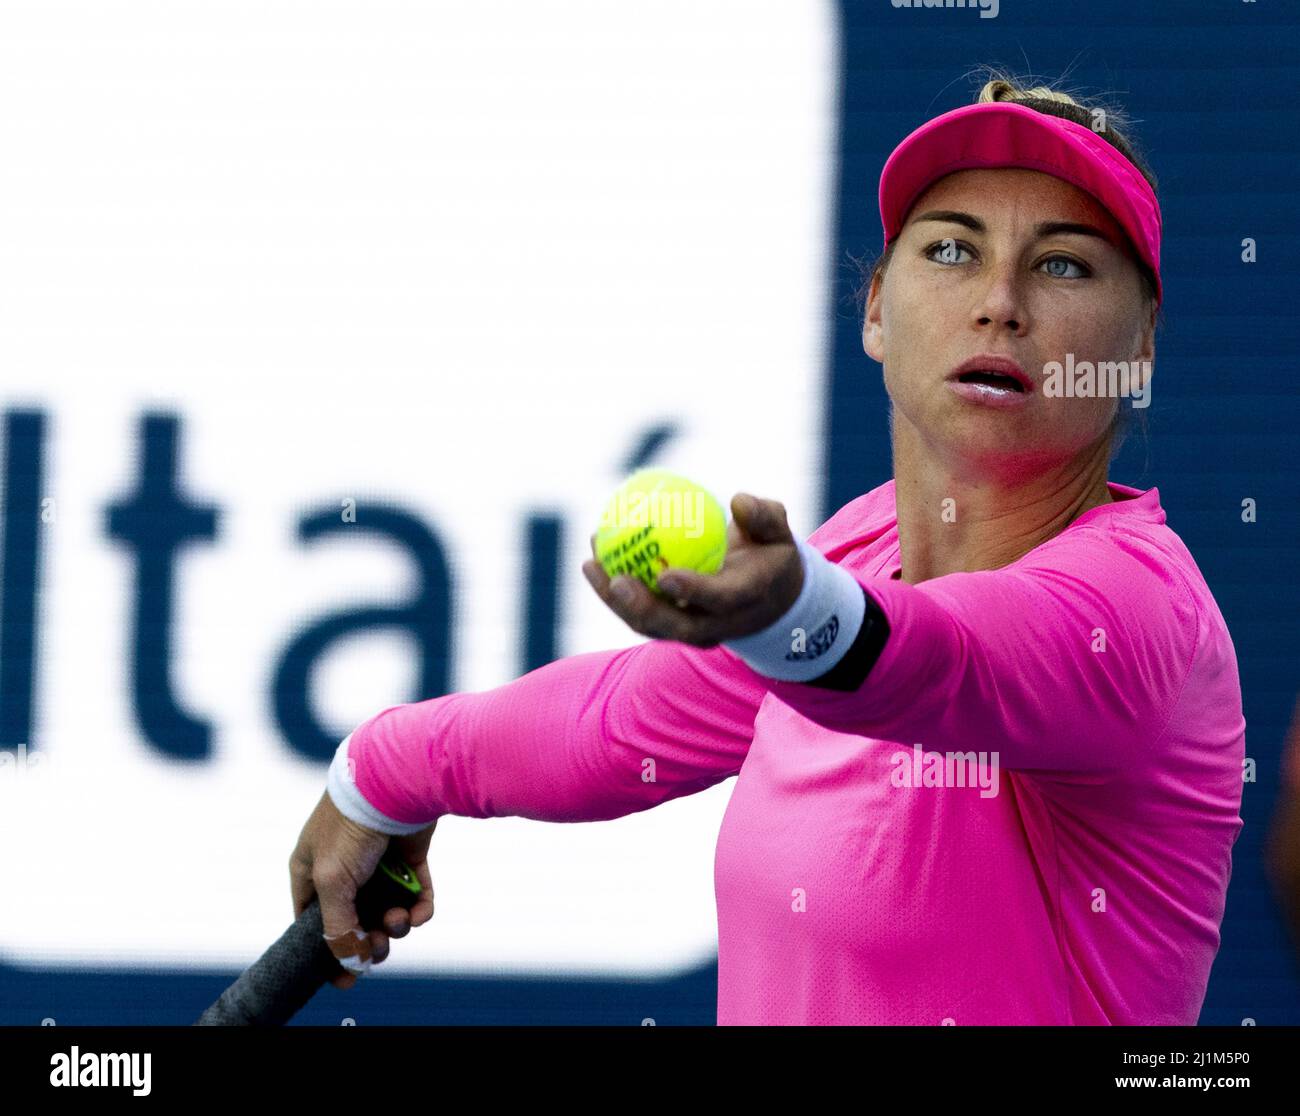 Miami Gardens, United States. 26th Mar, 2022. Vera Zvonareva from Russia serves to Danielle Collins from the USA at the Miami Open in the Hard Rock Stadium in Miami Gardens, Florida, on Saturday, March 26, 2022. Collins defeated Zvonareva 6-1, 6-4. Photo by Gary I Rothstein/UPI Credit: UPI/Alamy Live News Stock Photo